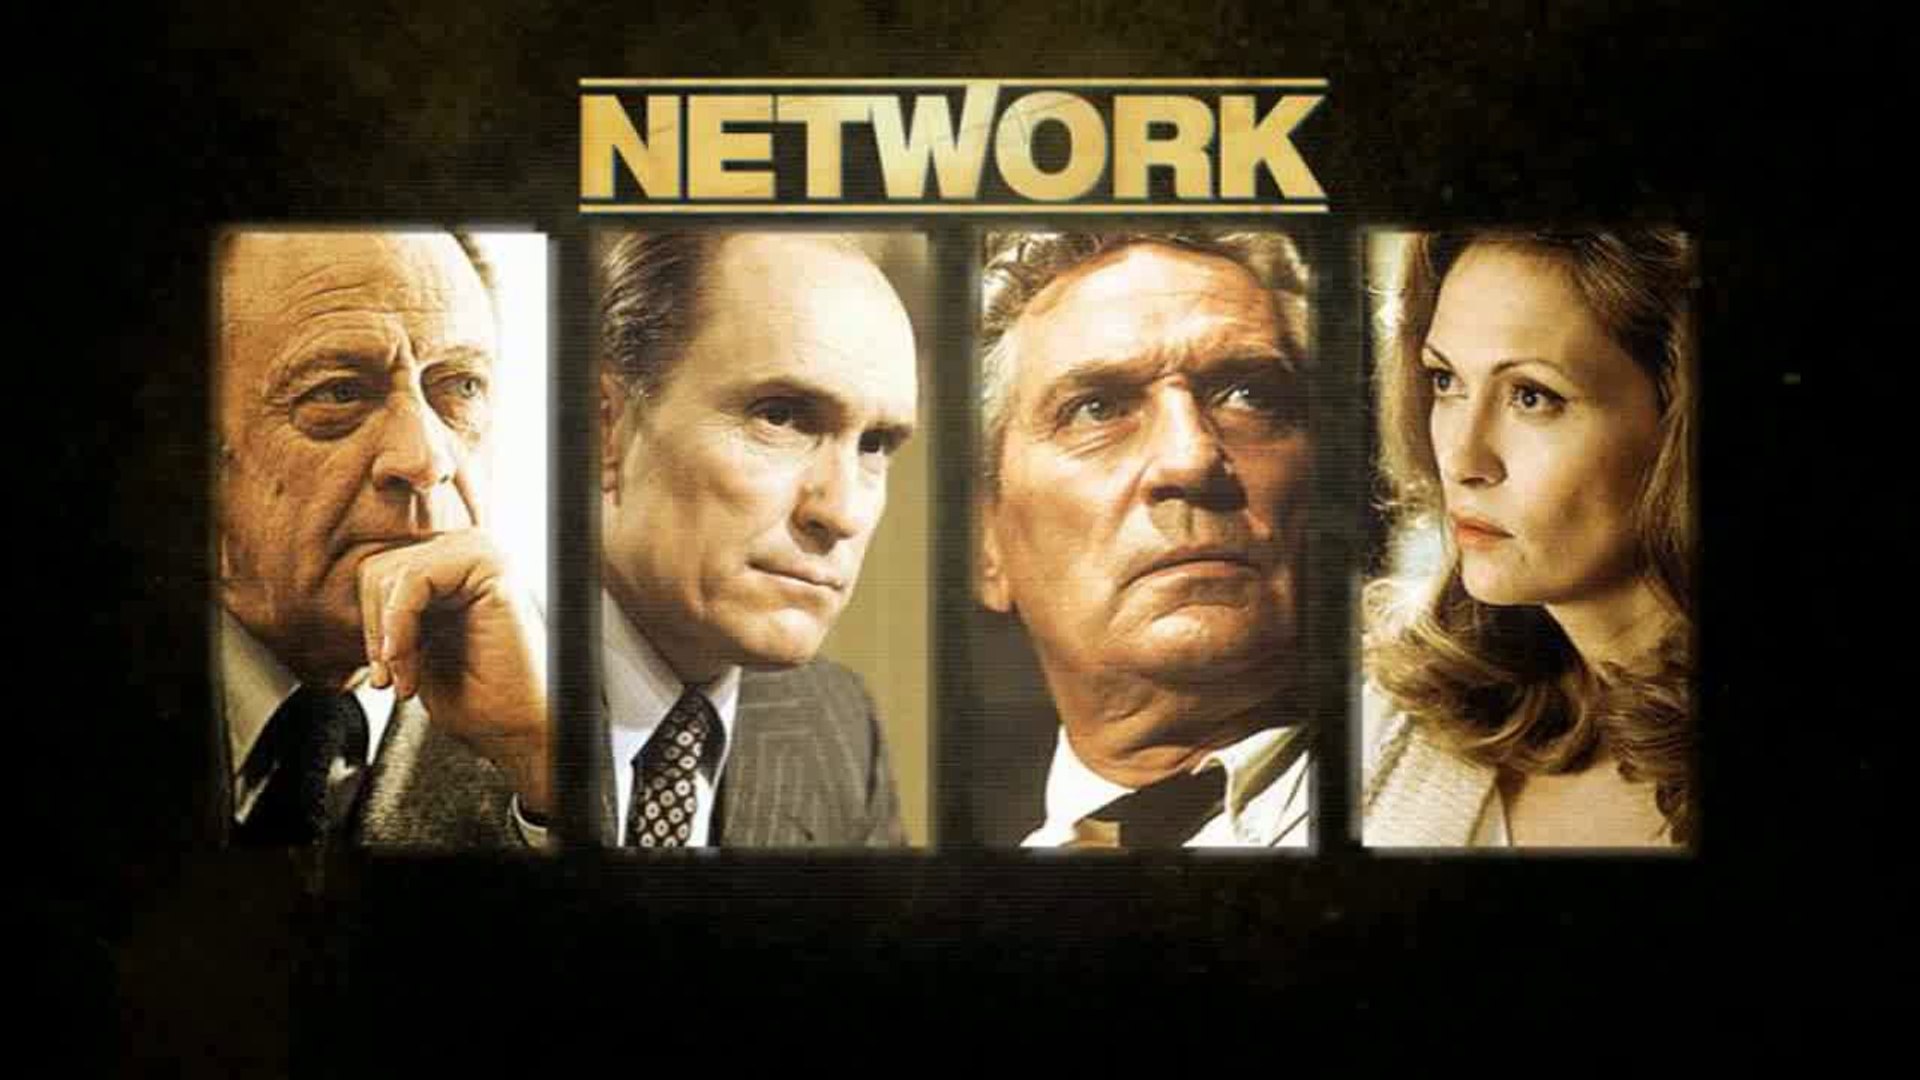 Download Network 1976 Full Hd Quality